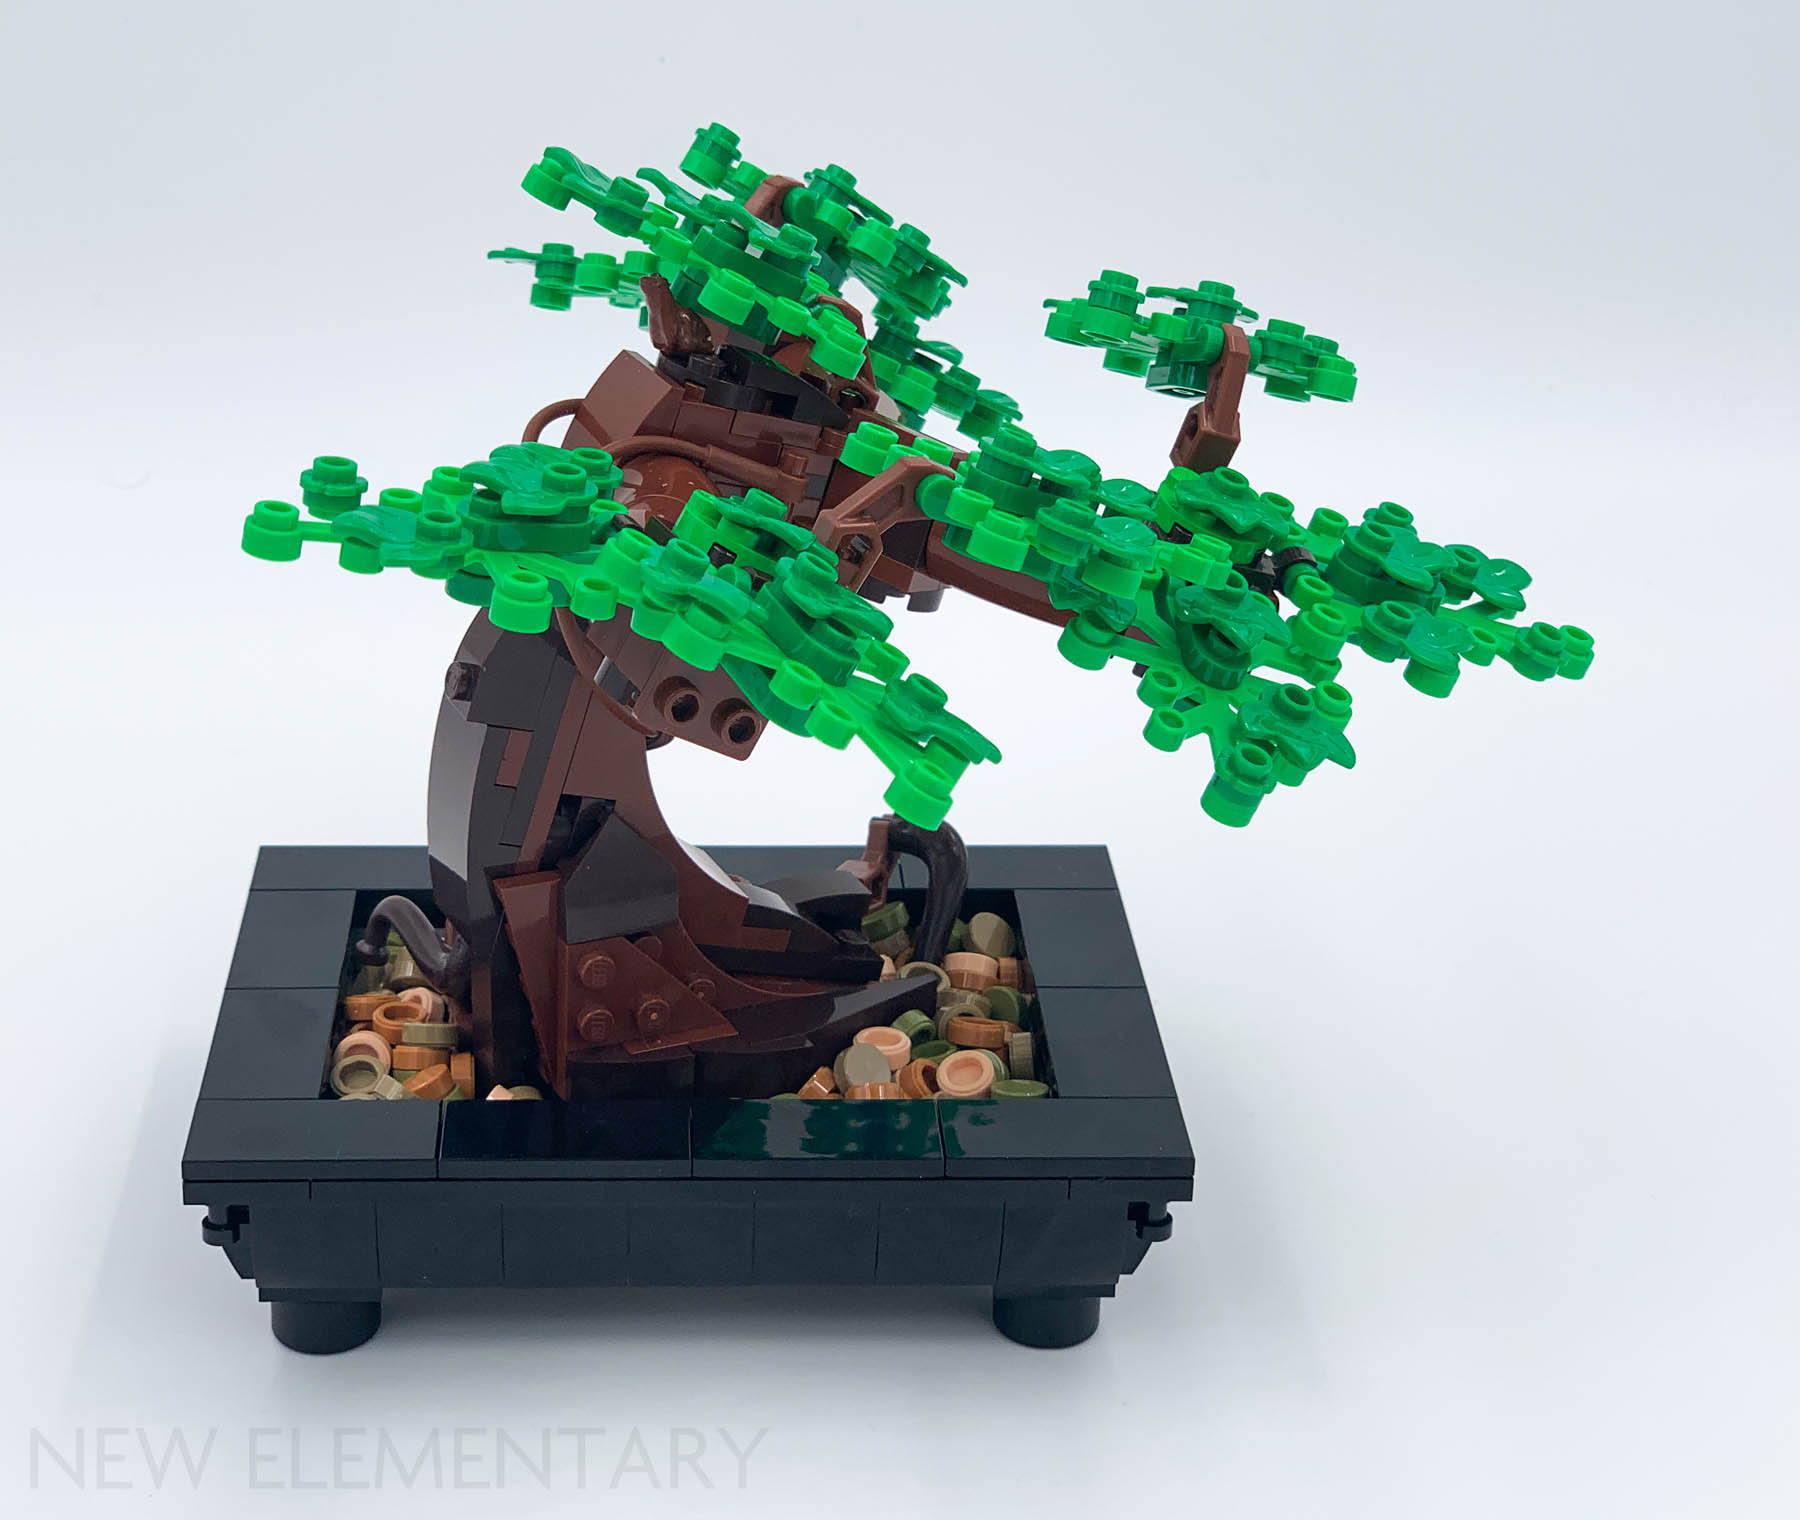 Lego releases flower and bonsai kits to build beautiful pieces of